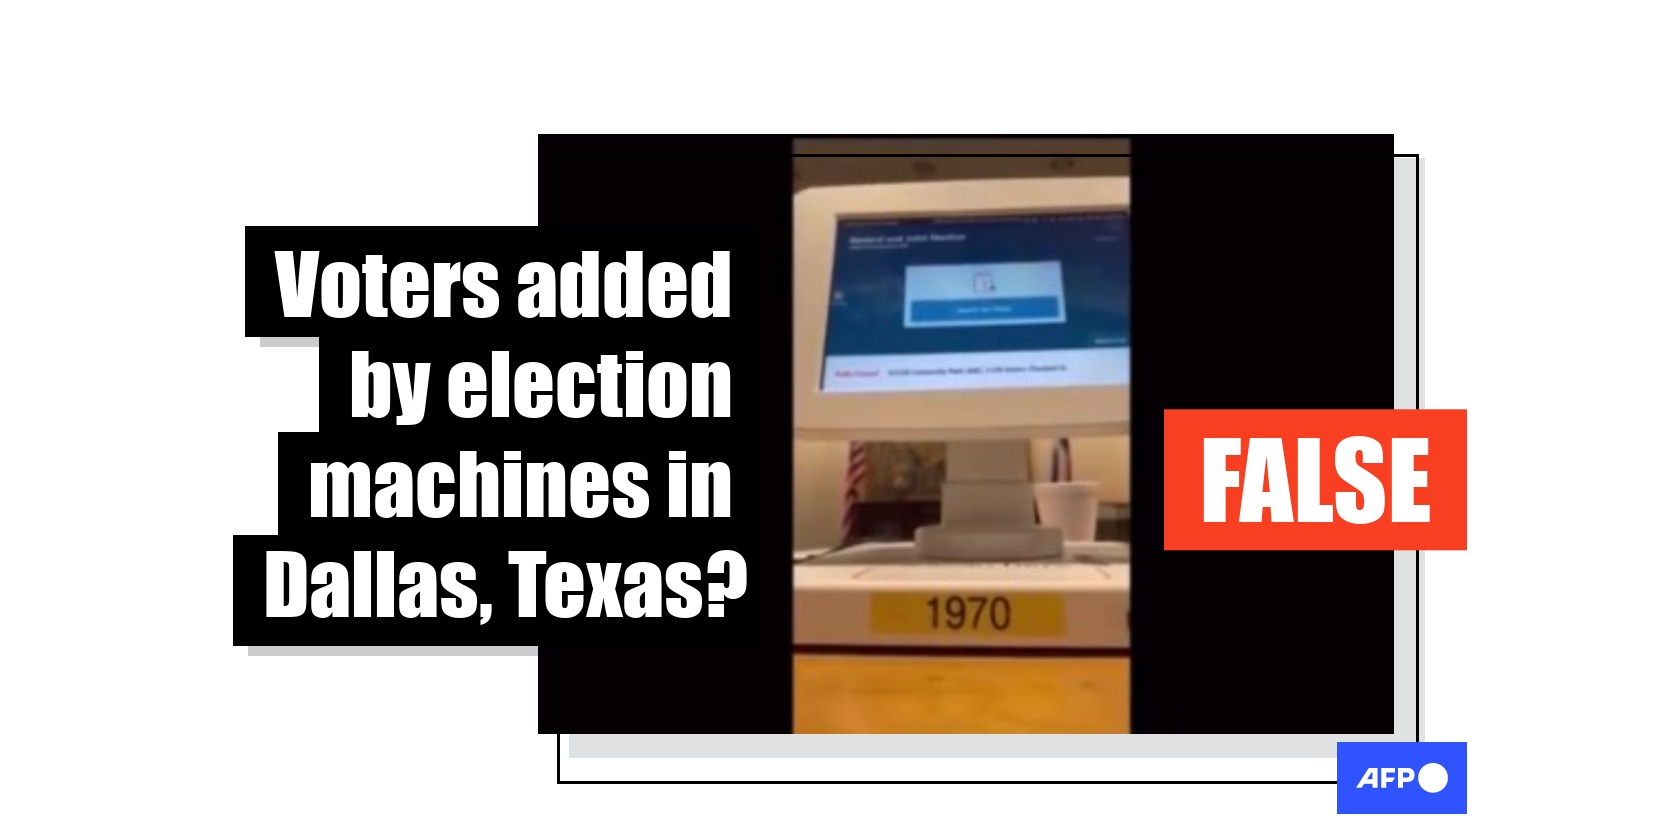 Electronic poll books: faster, smoother voter check-in on Election